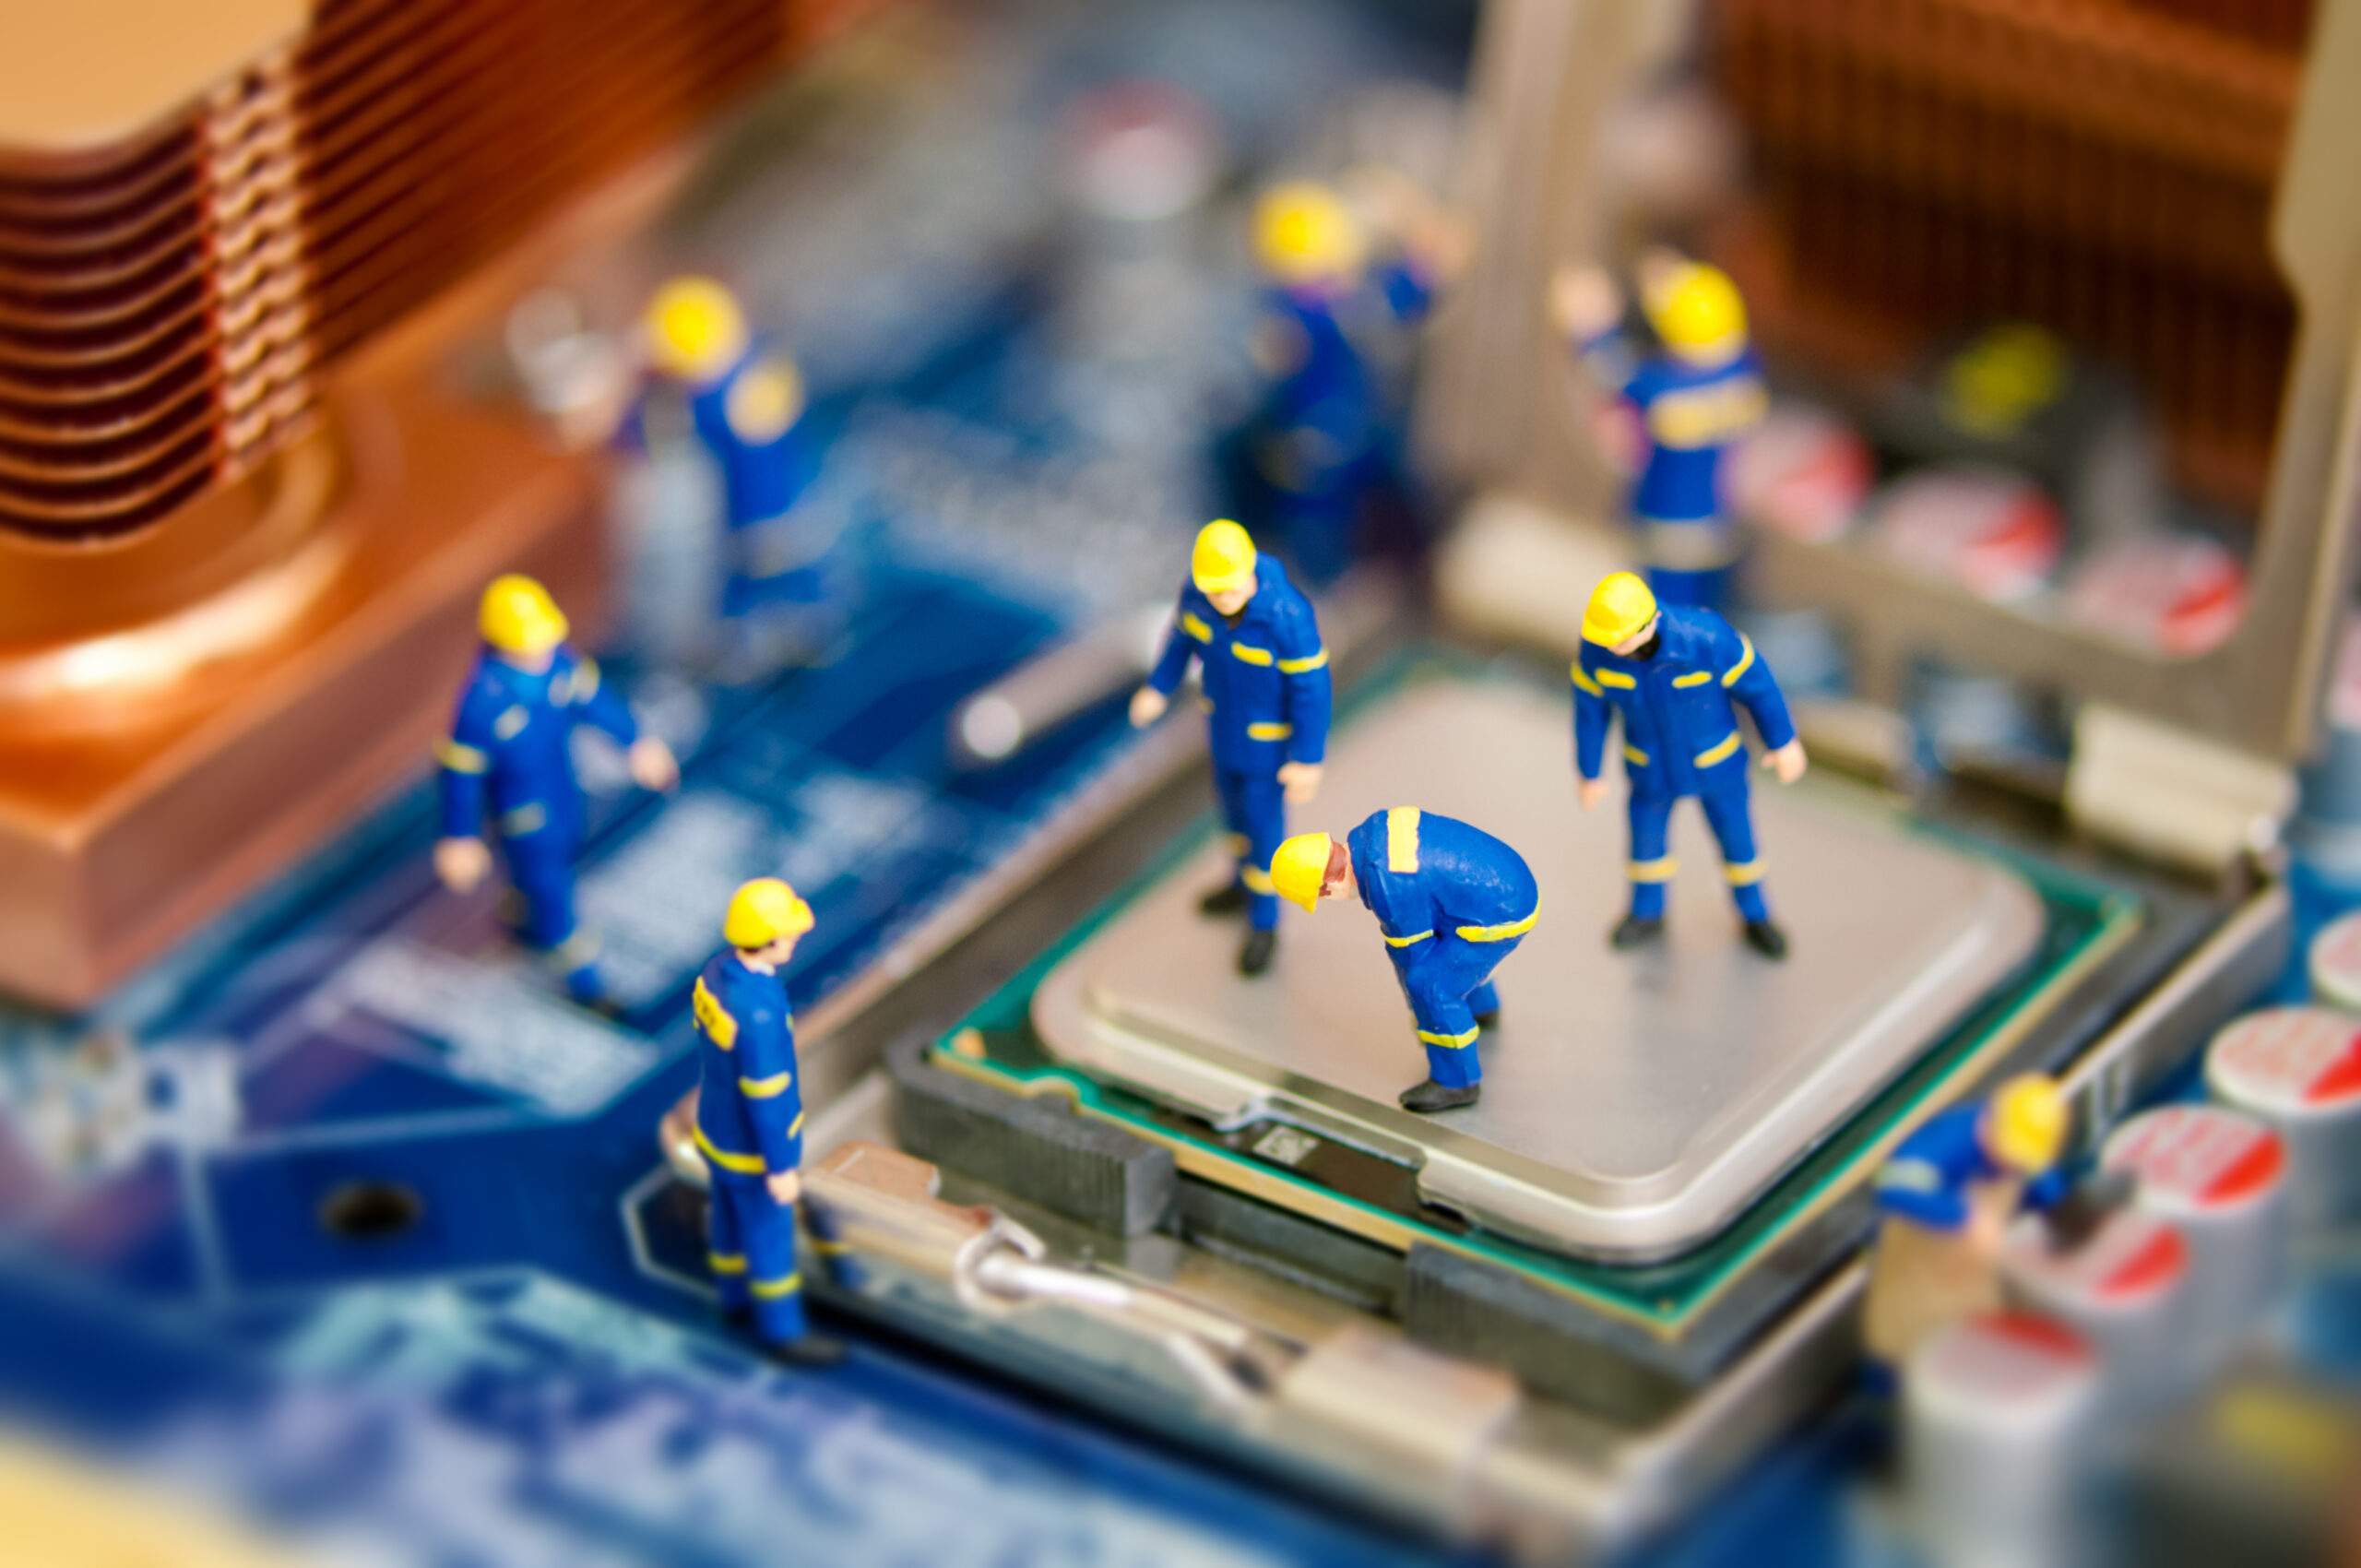 Miniature men fixing and providing tech support for a motherboard